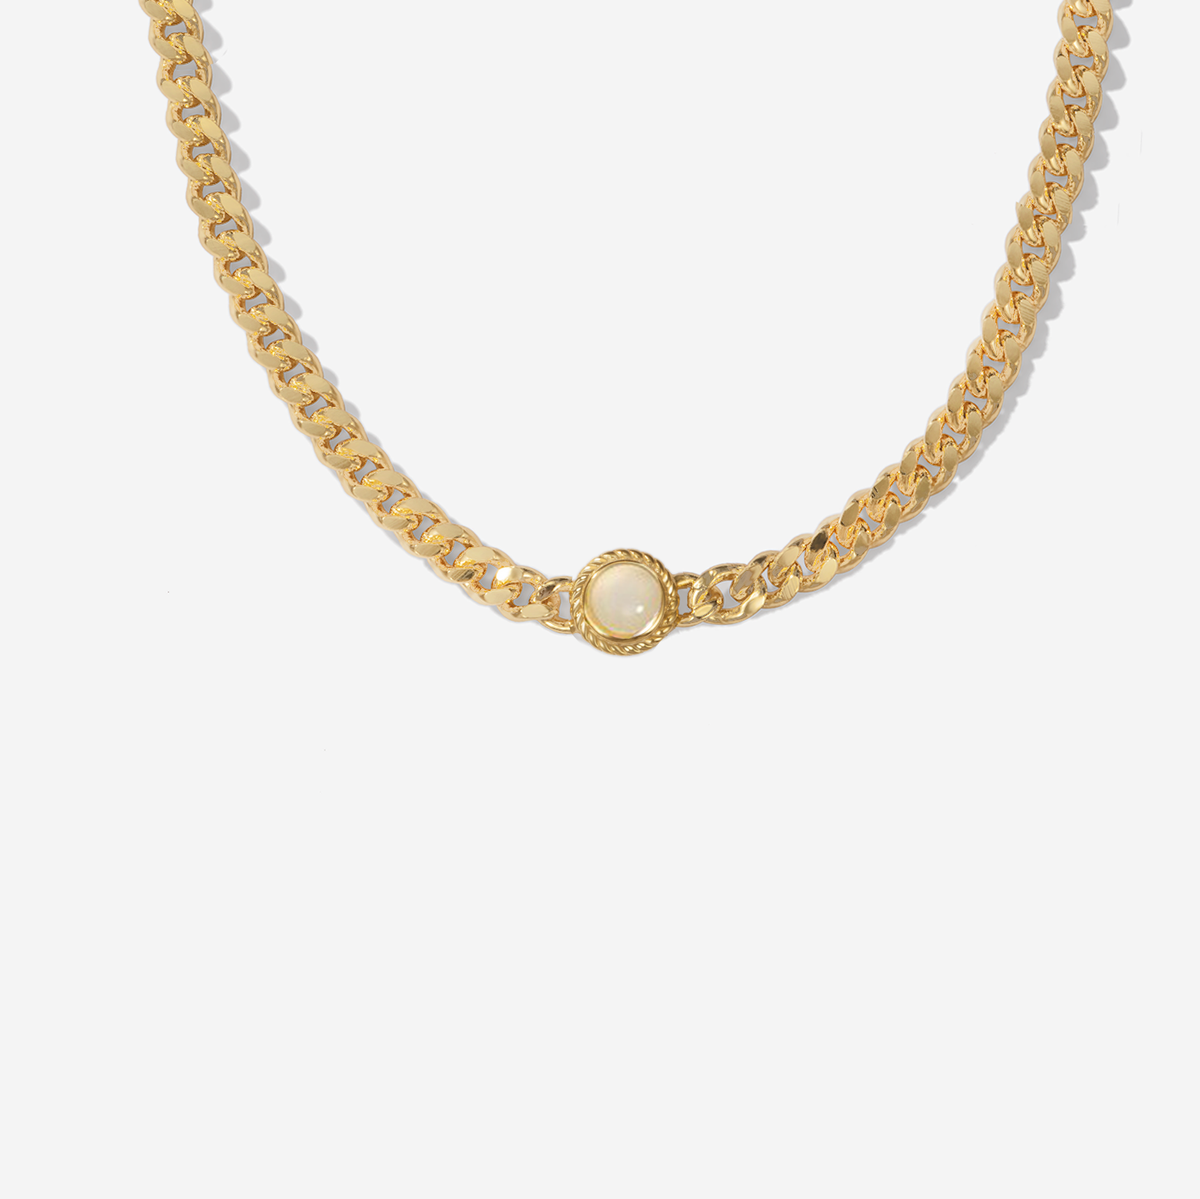 Chunky curb chain moonstone necklace â golston jewelry